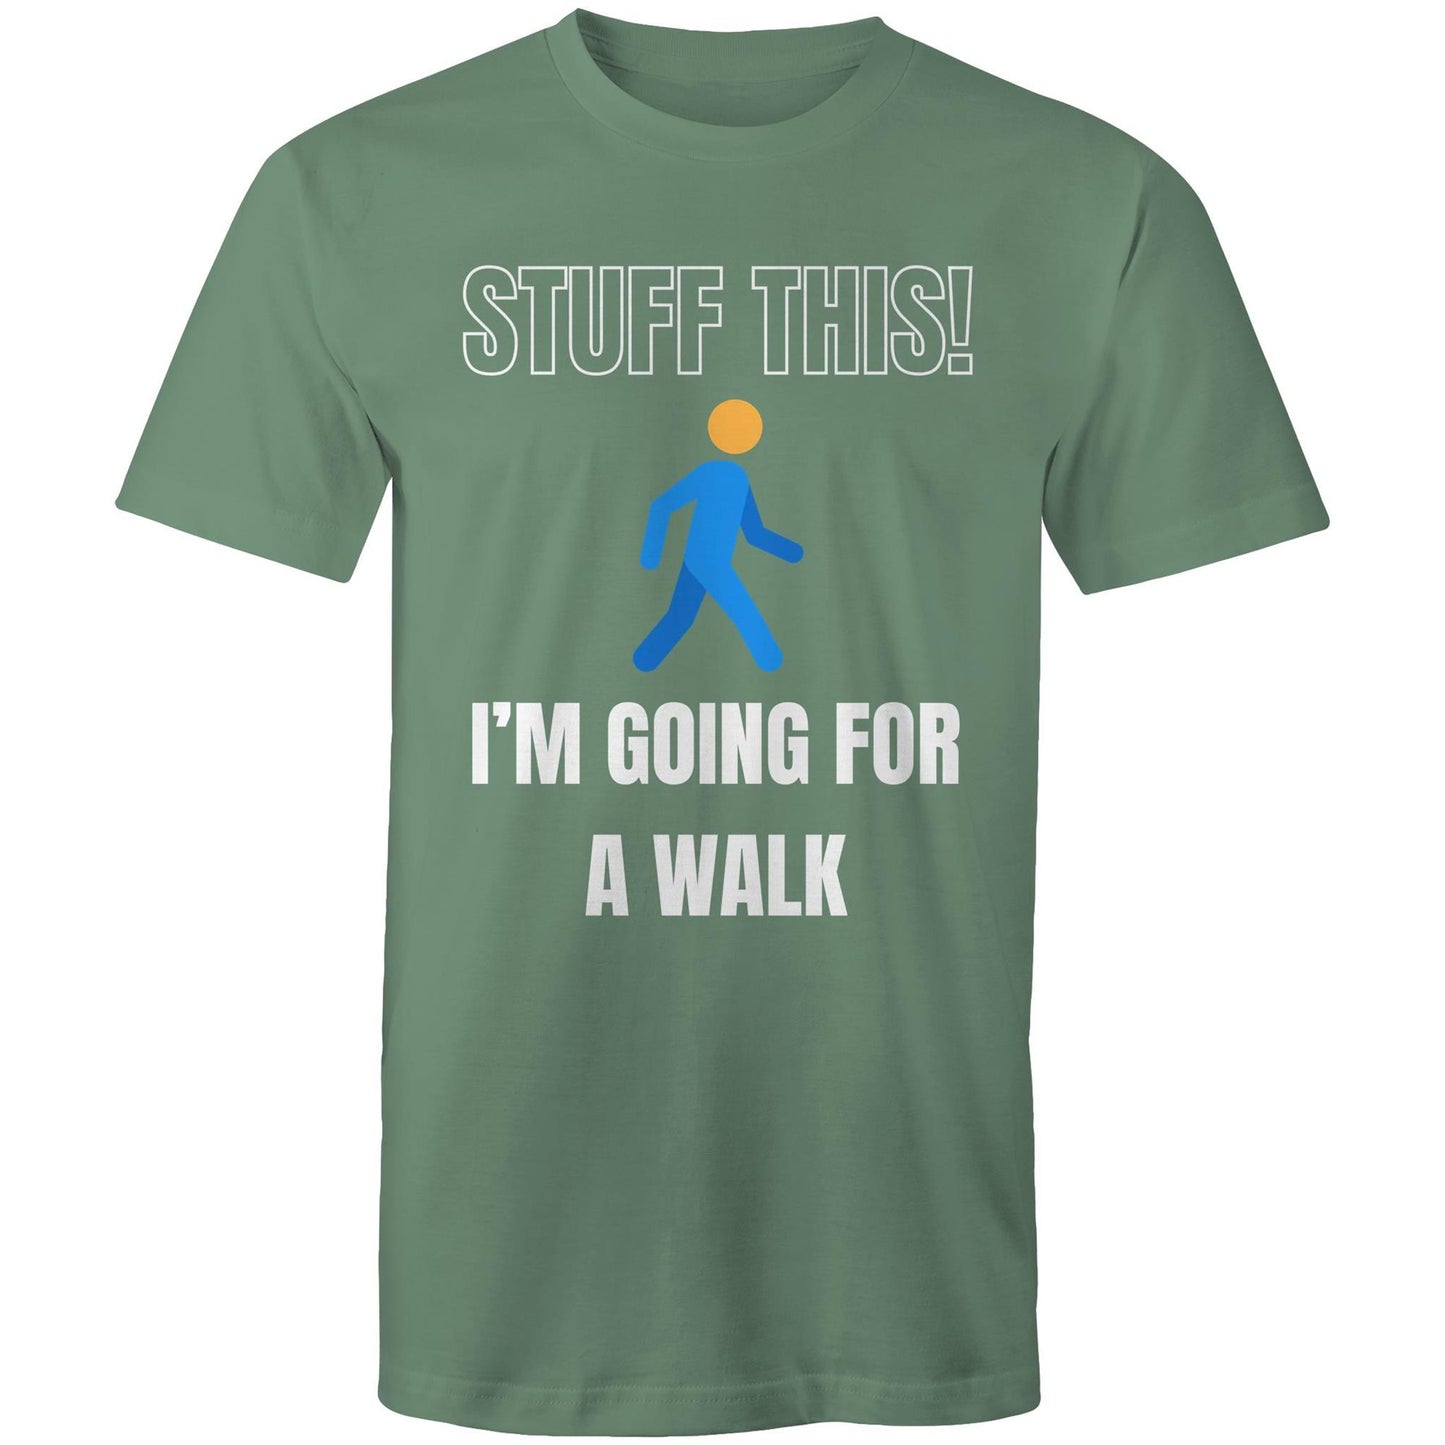 Stuff This! I'm Going For a Walk - Mens T-Shirt